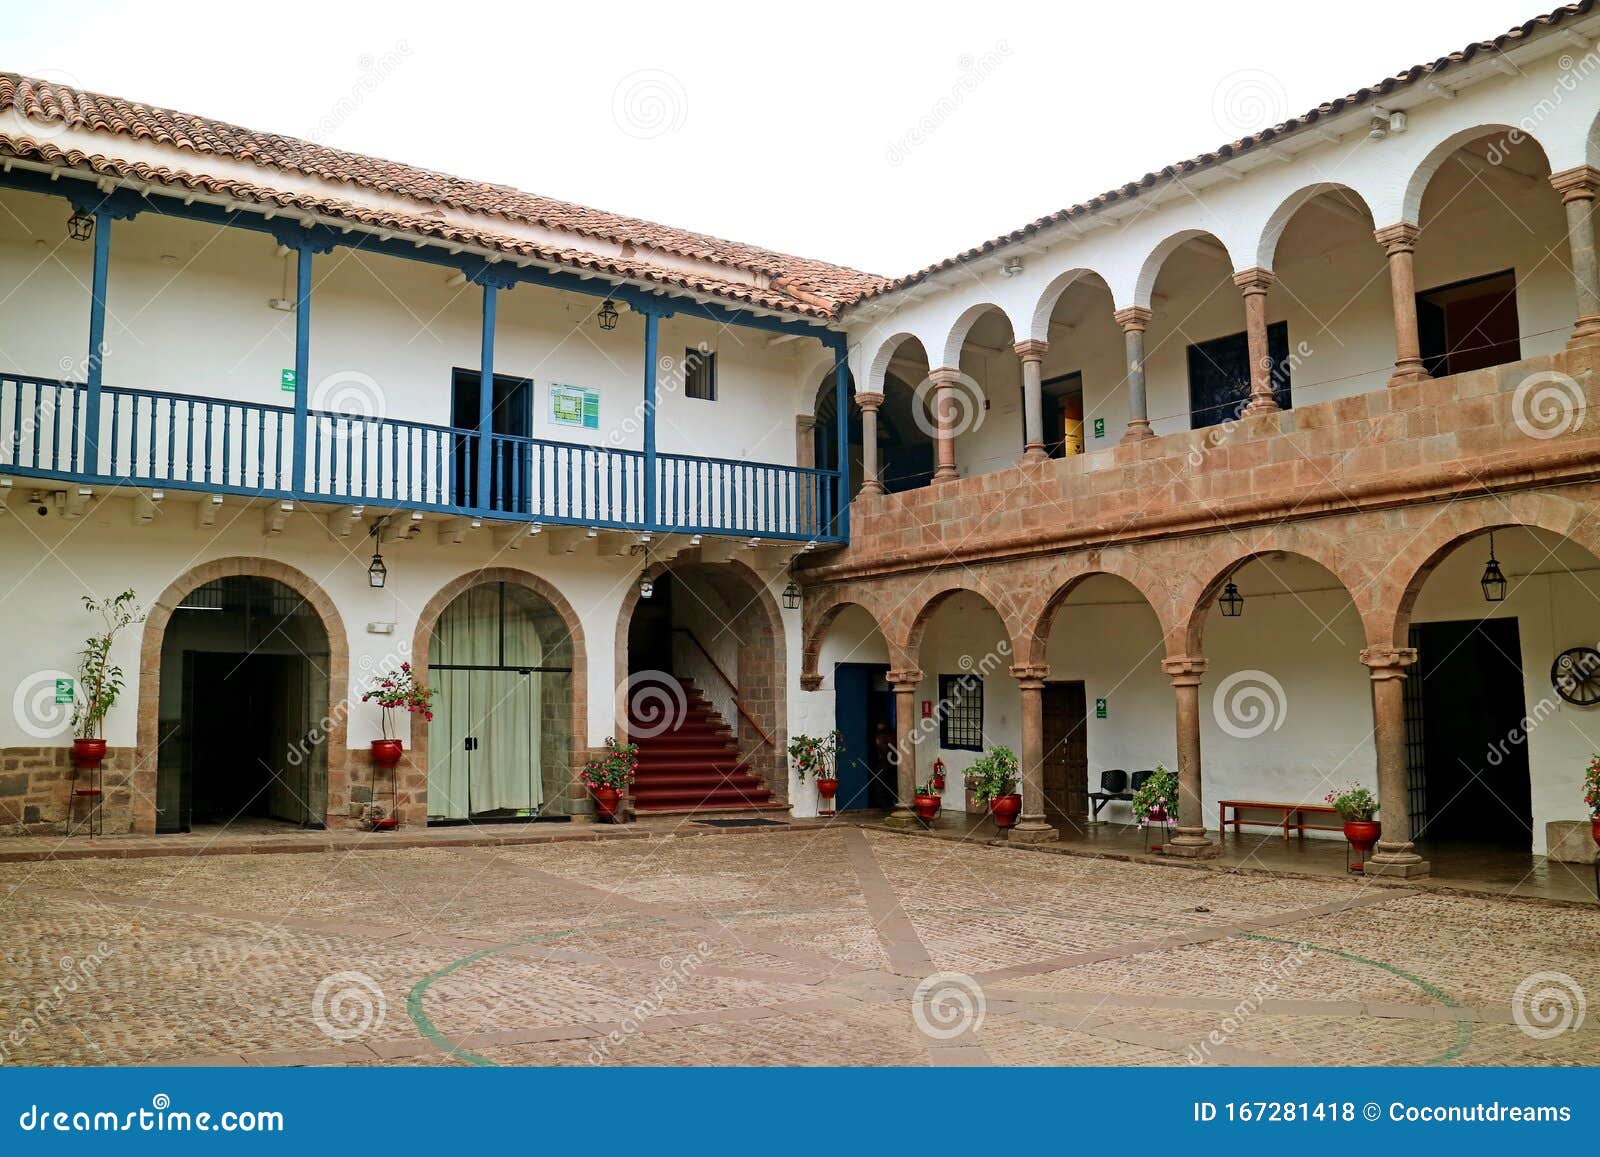 the courtyard of the regional history museum or museo historico regional in cusco, peru